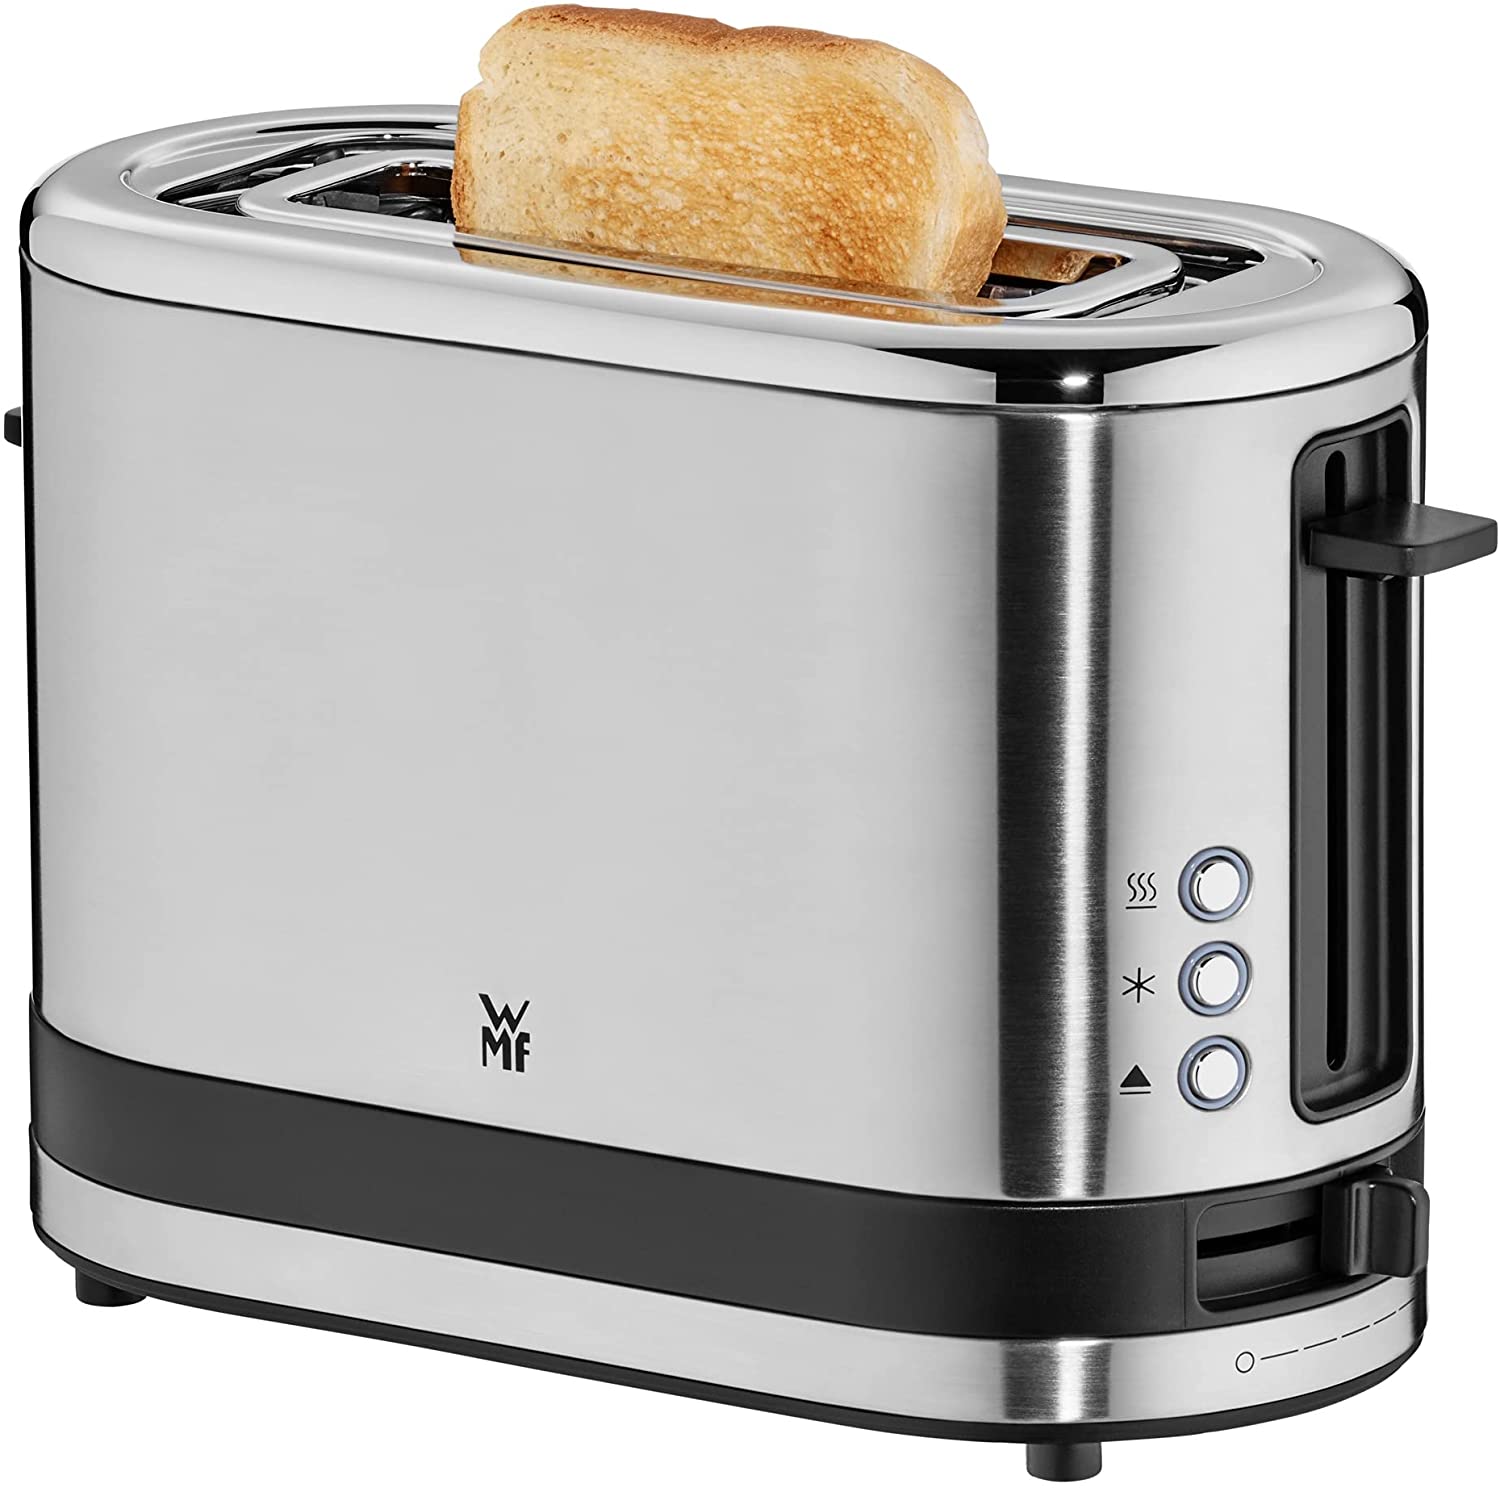 WMF KÜCHENminis 1-slice toaster long slot XXl-Toast bun top 7 browning levels overheating protection 600W stainless steel matt